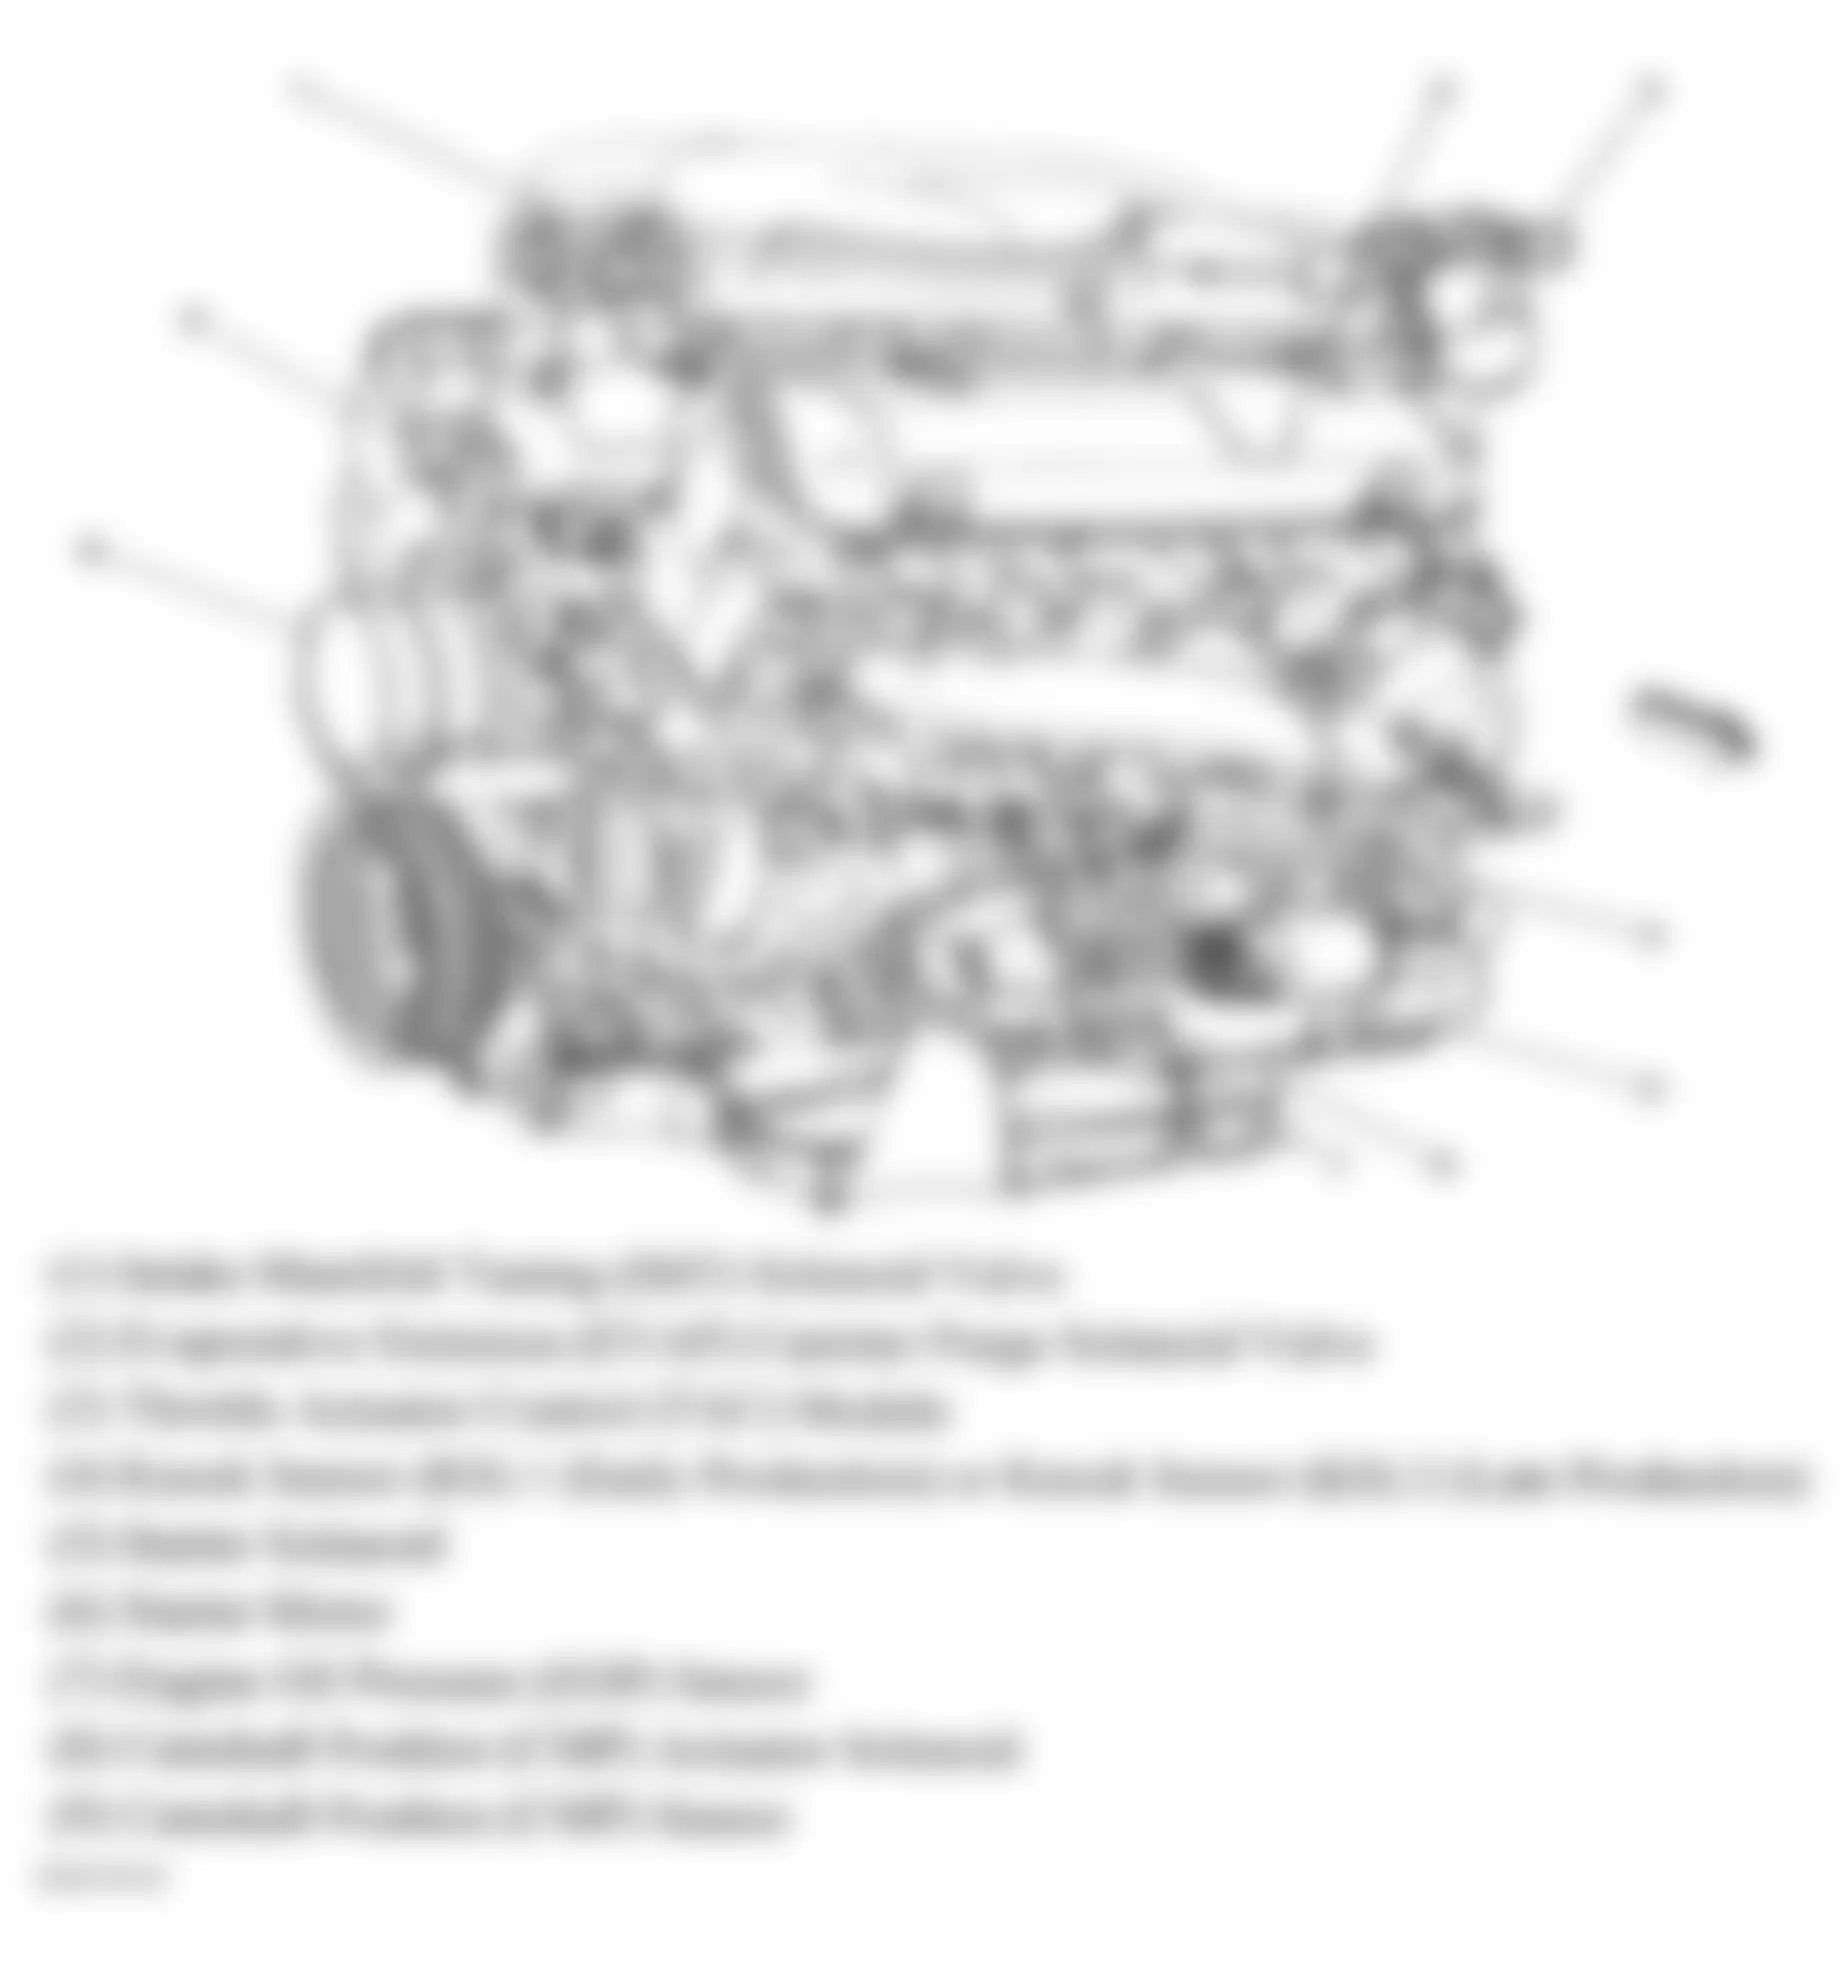 Buick Terraza CXL 2006 - Component Locations -  Left Side Of Engine (3.9L)